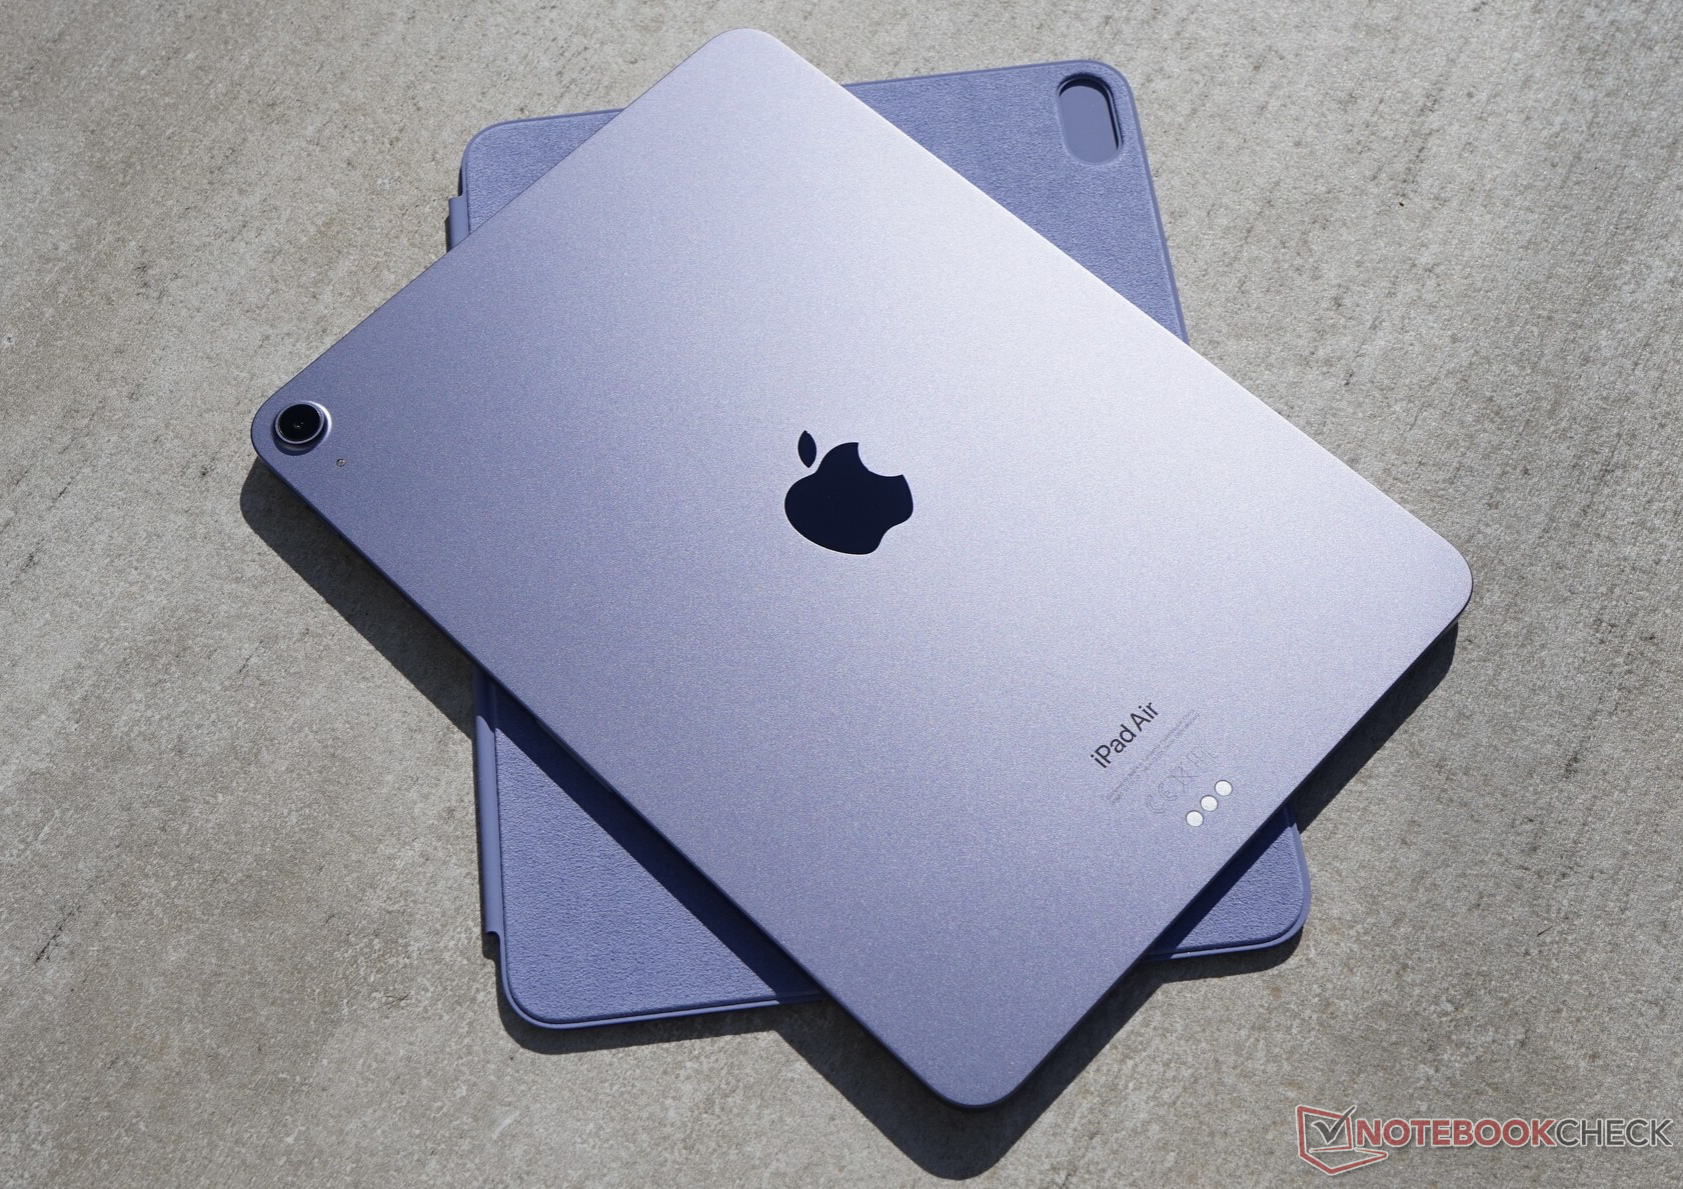 New larger Apple iPad Air tipped to launch as cheaper alternative